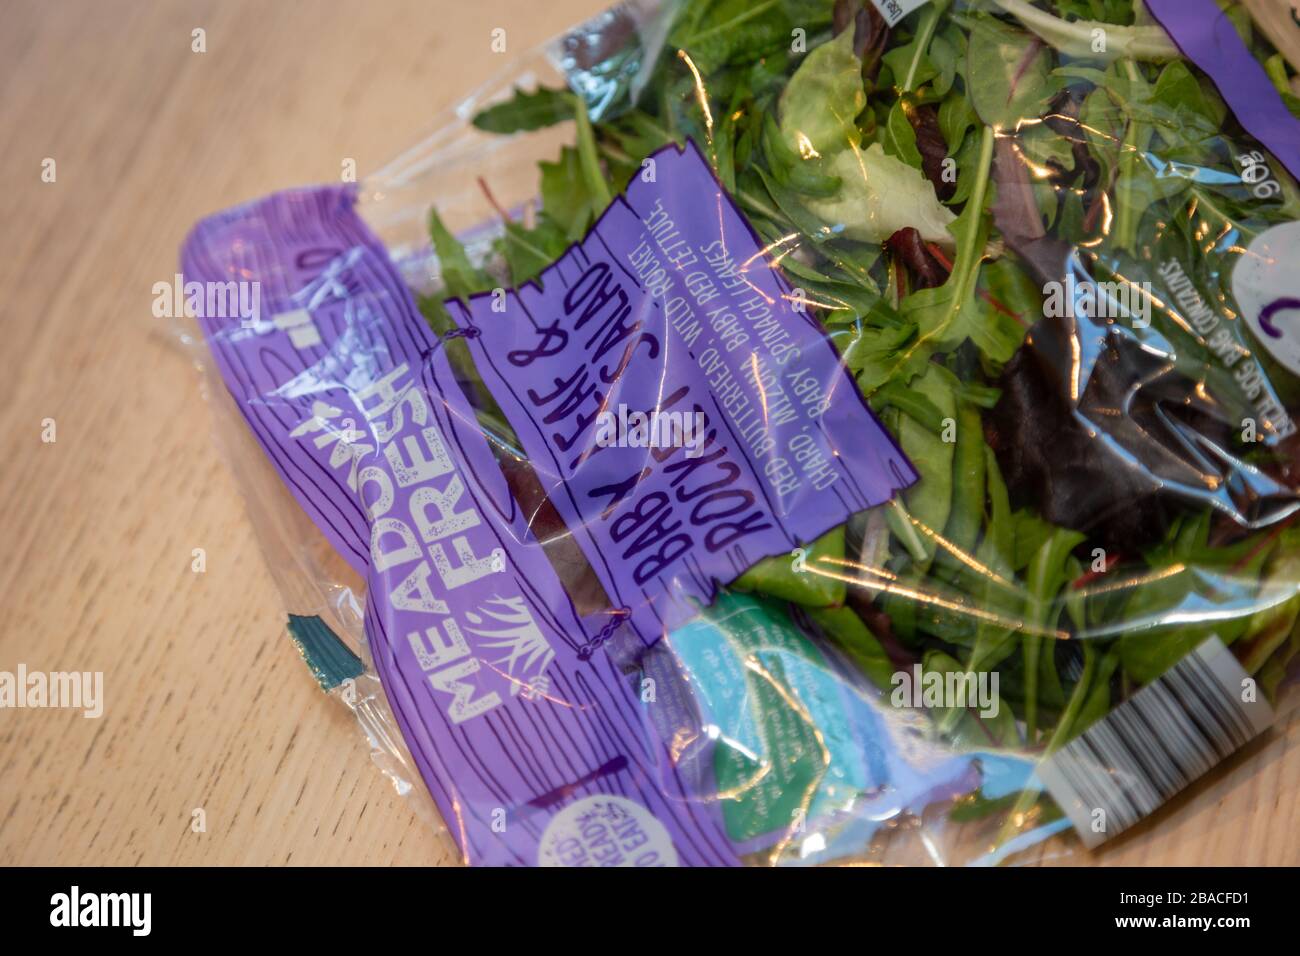 Lild packaged baby leaf and rocket salad Stock Photo